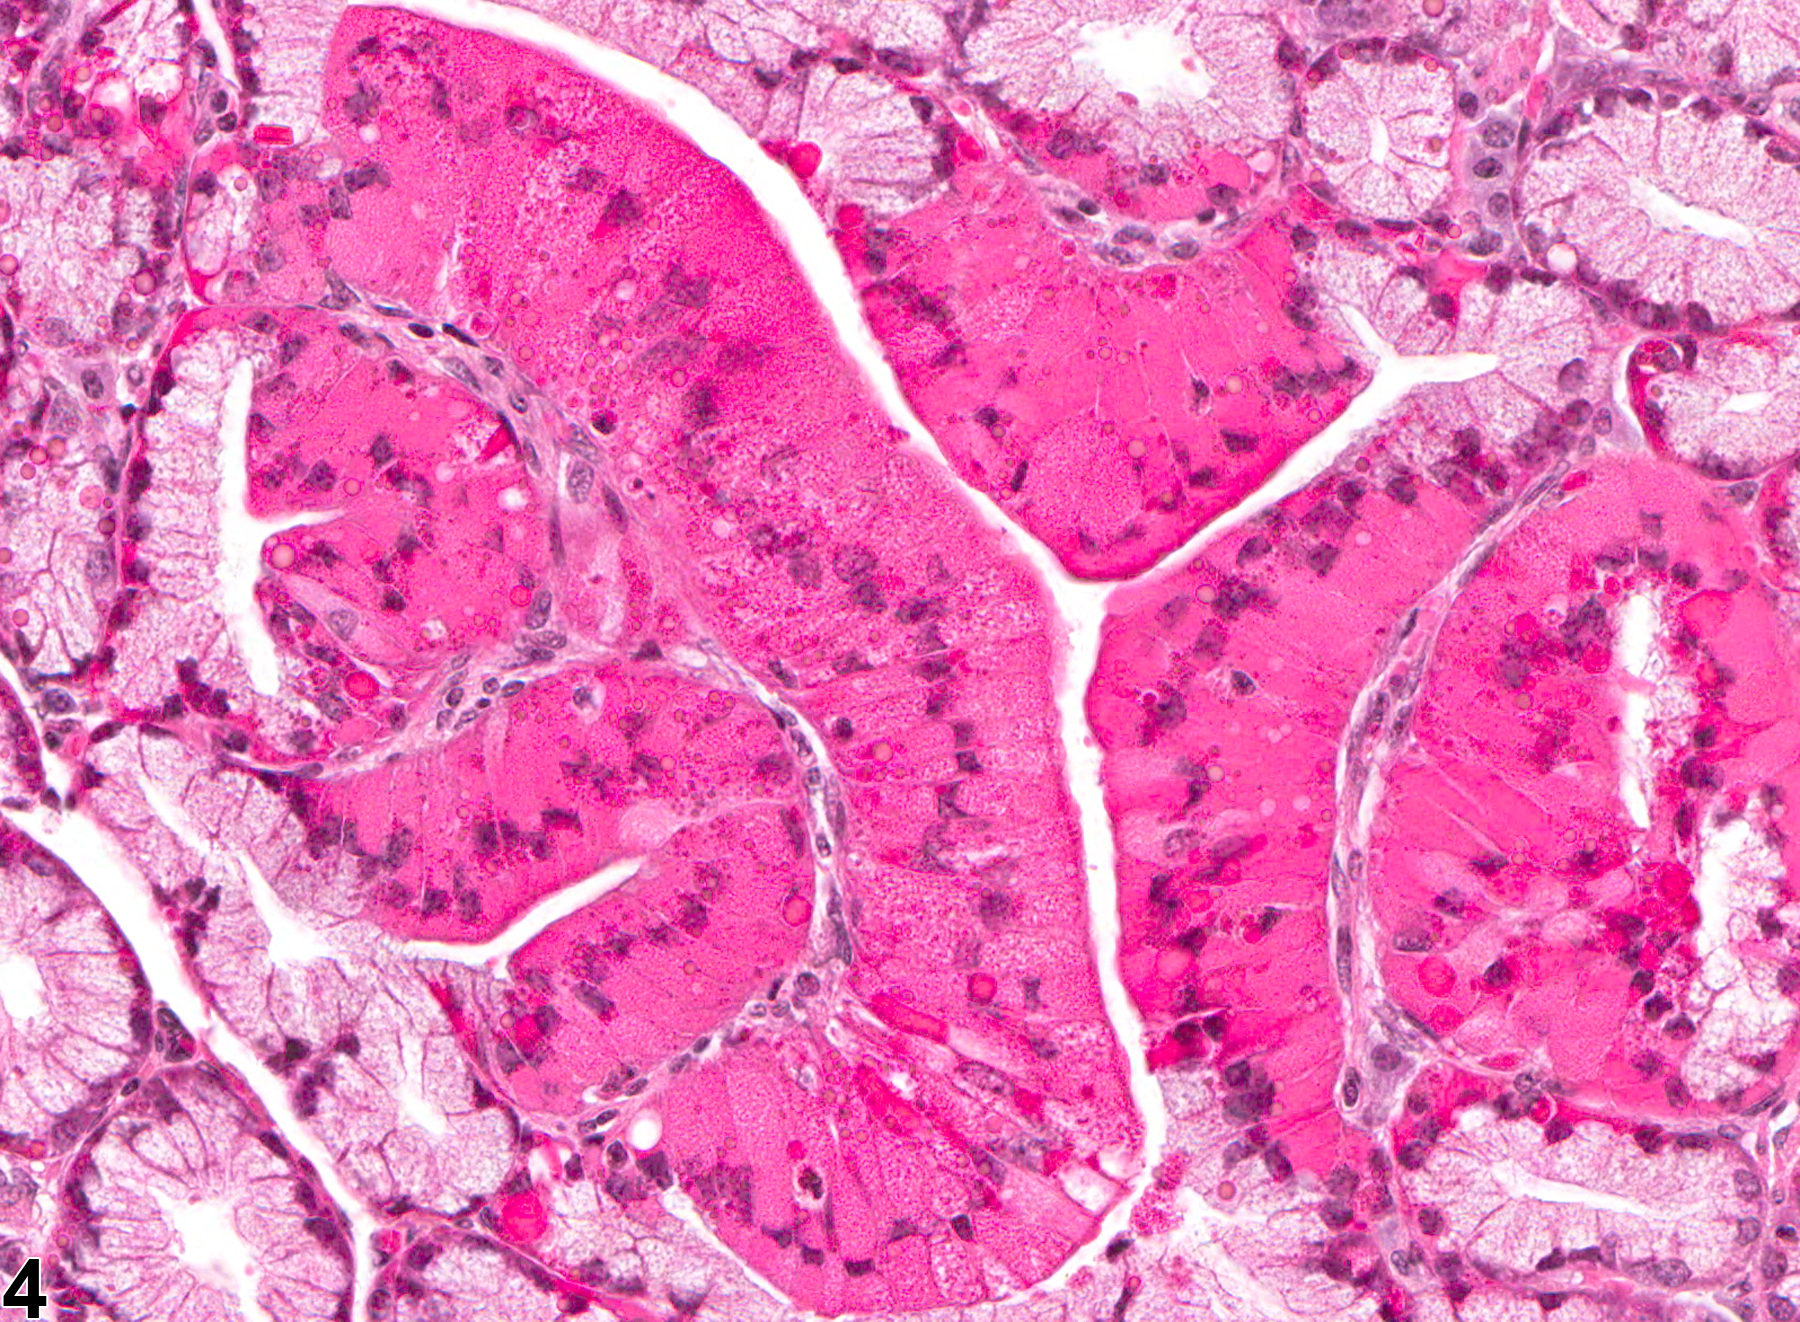 Image of hyaline droplet in the glandular stomach from a female B6C3F1 mouse in a chronic study